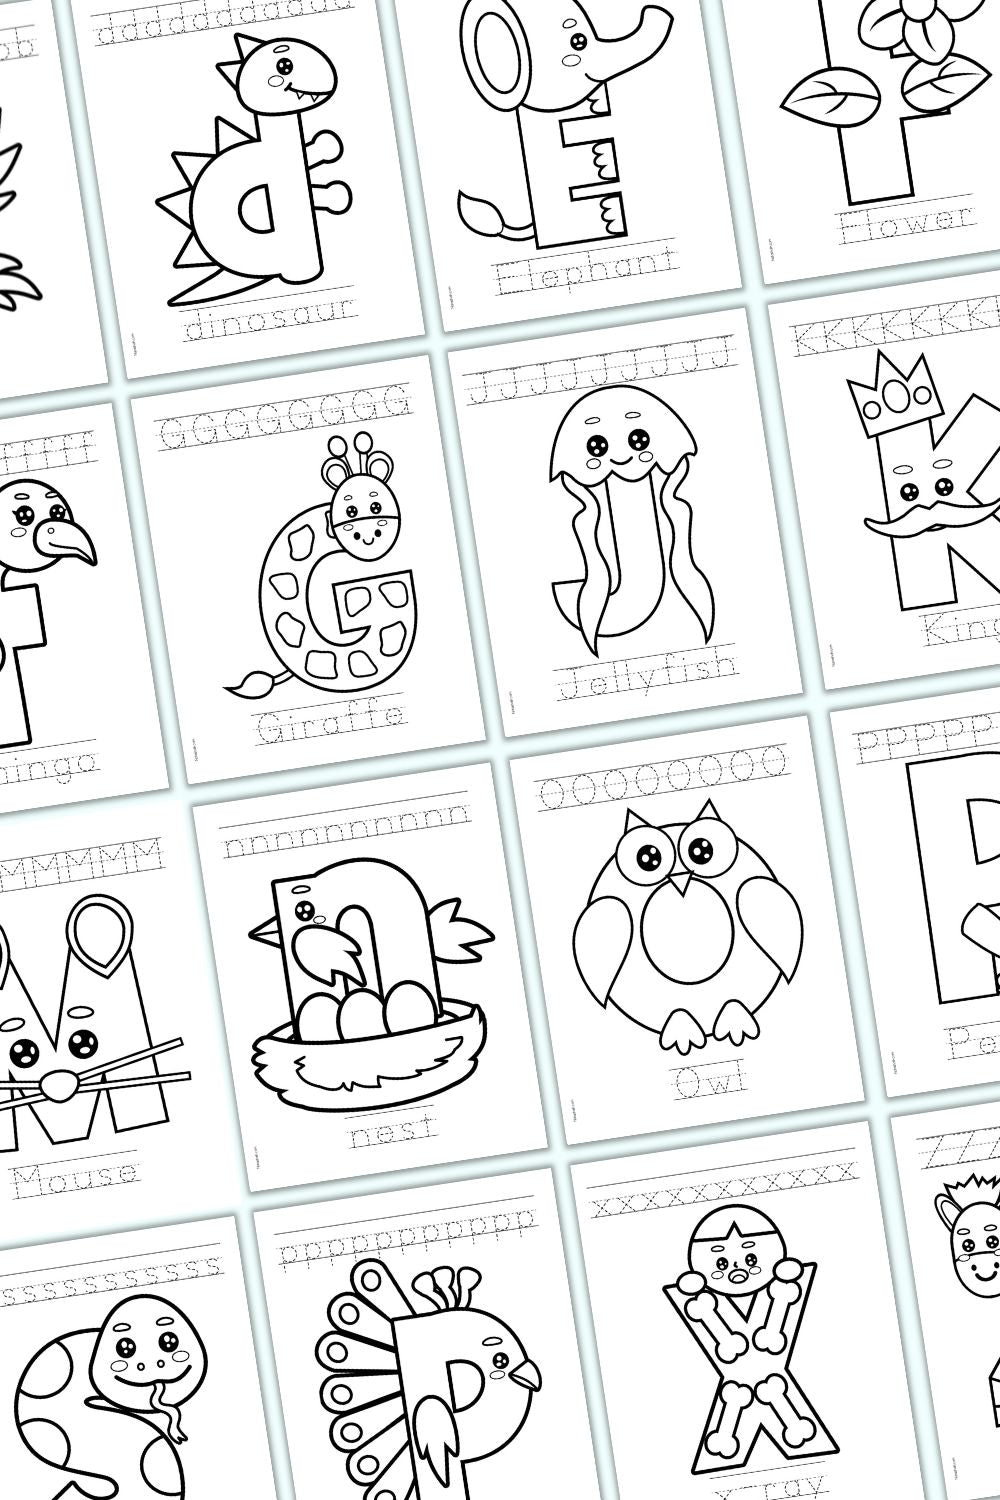 16 pages of coloring and alphabet letter tracing pages